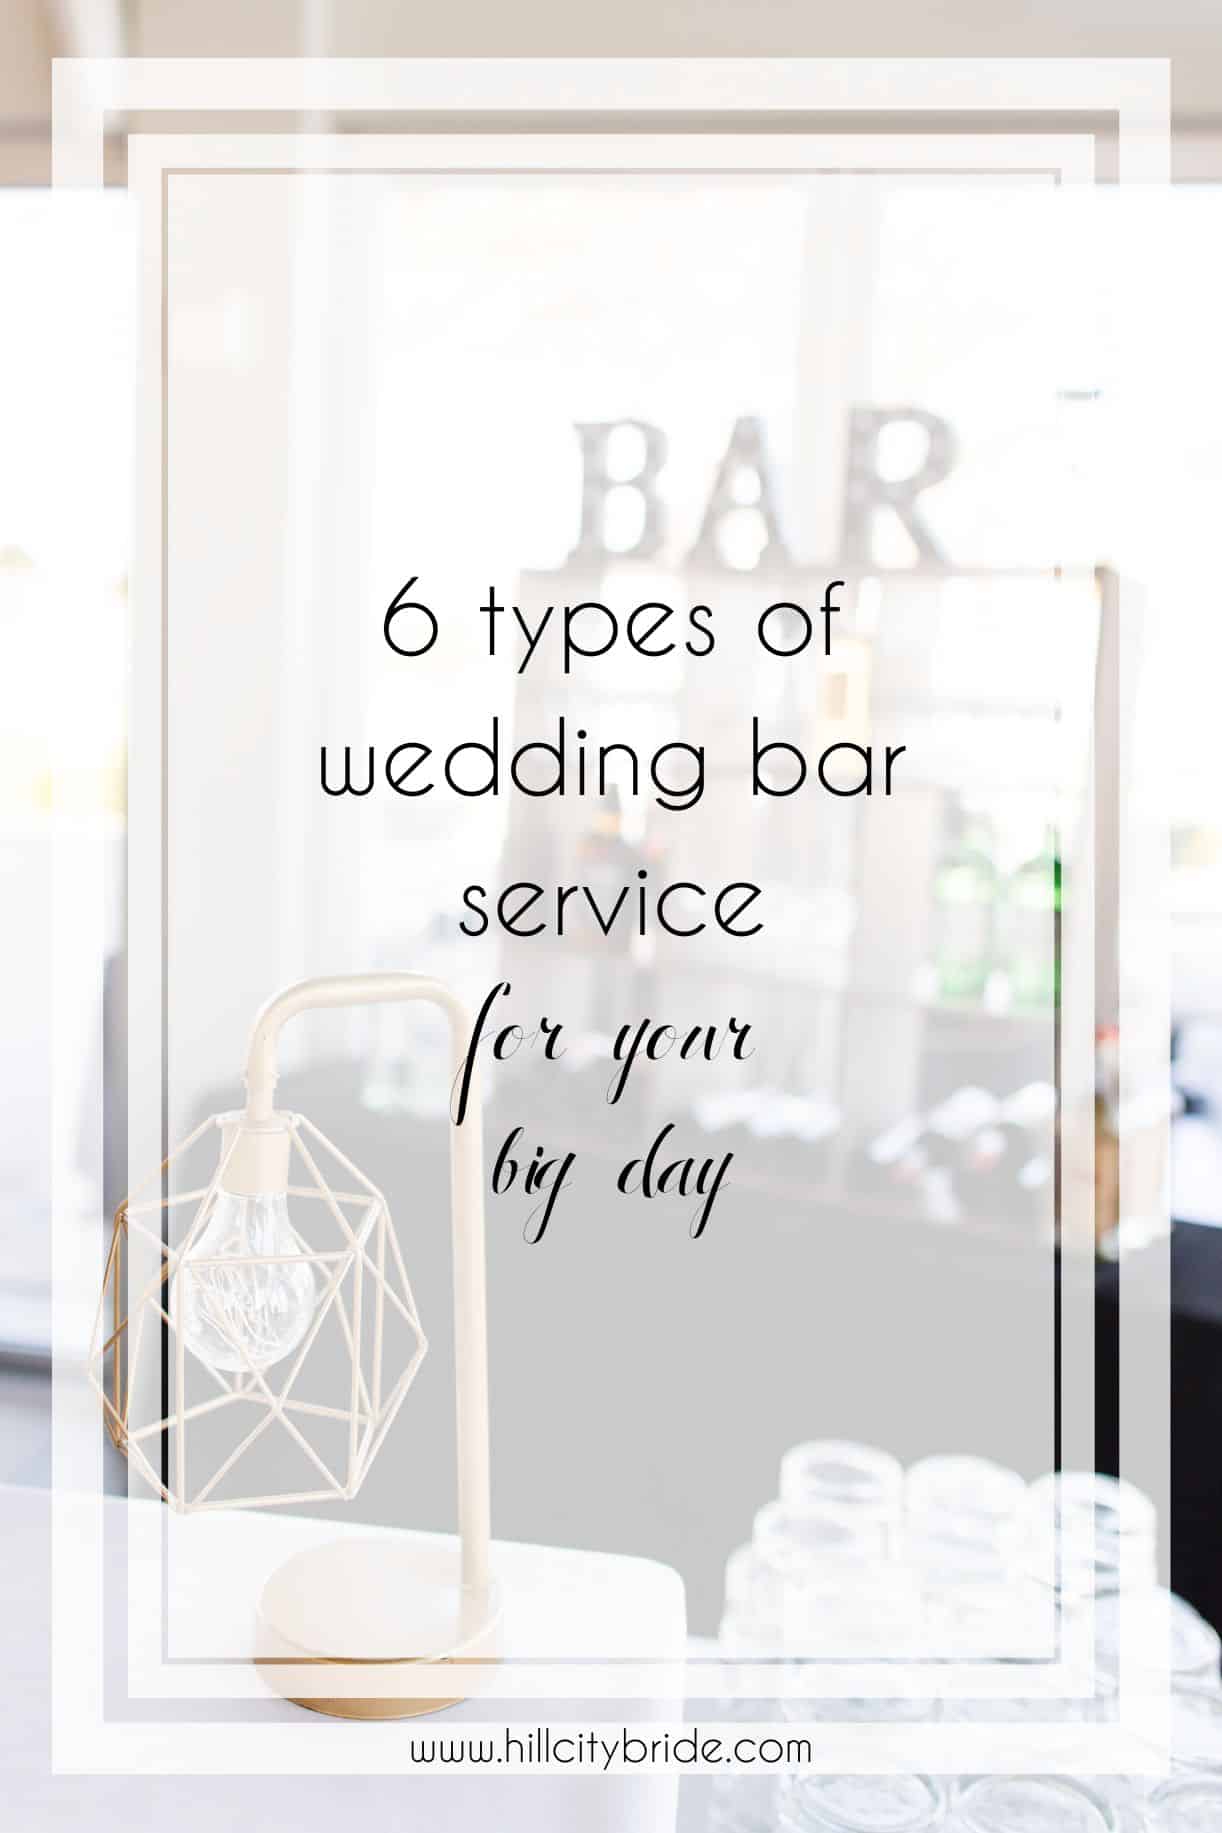 6 Types of Wedding Bar Service to Consider for Your Big Day